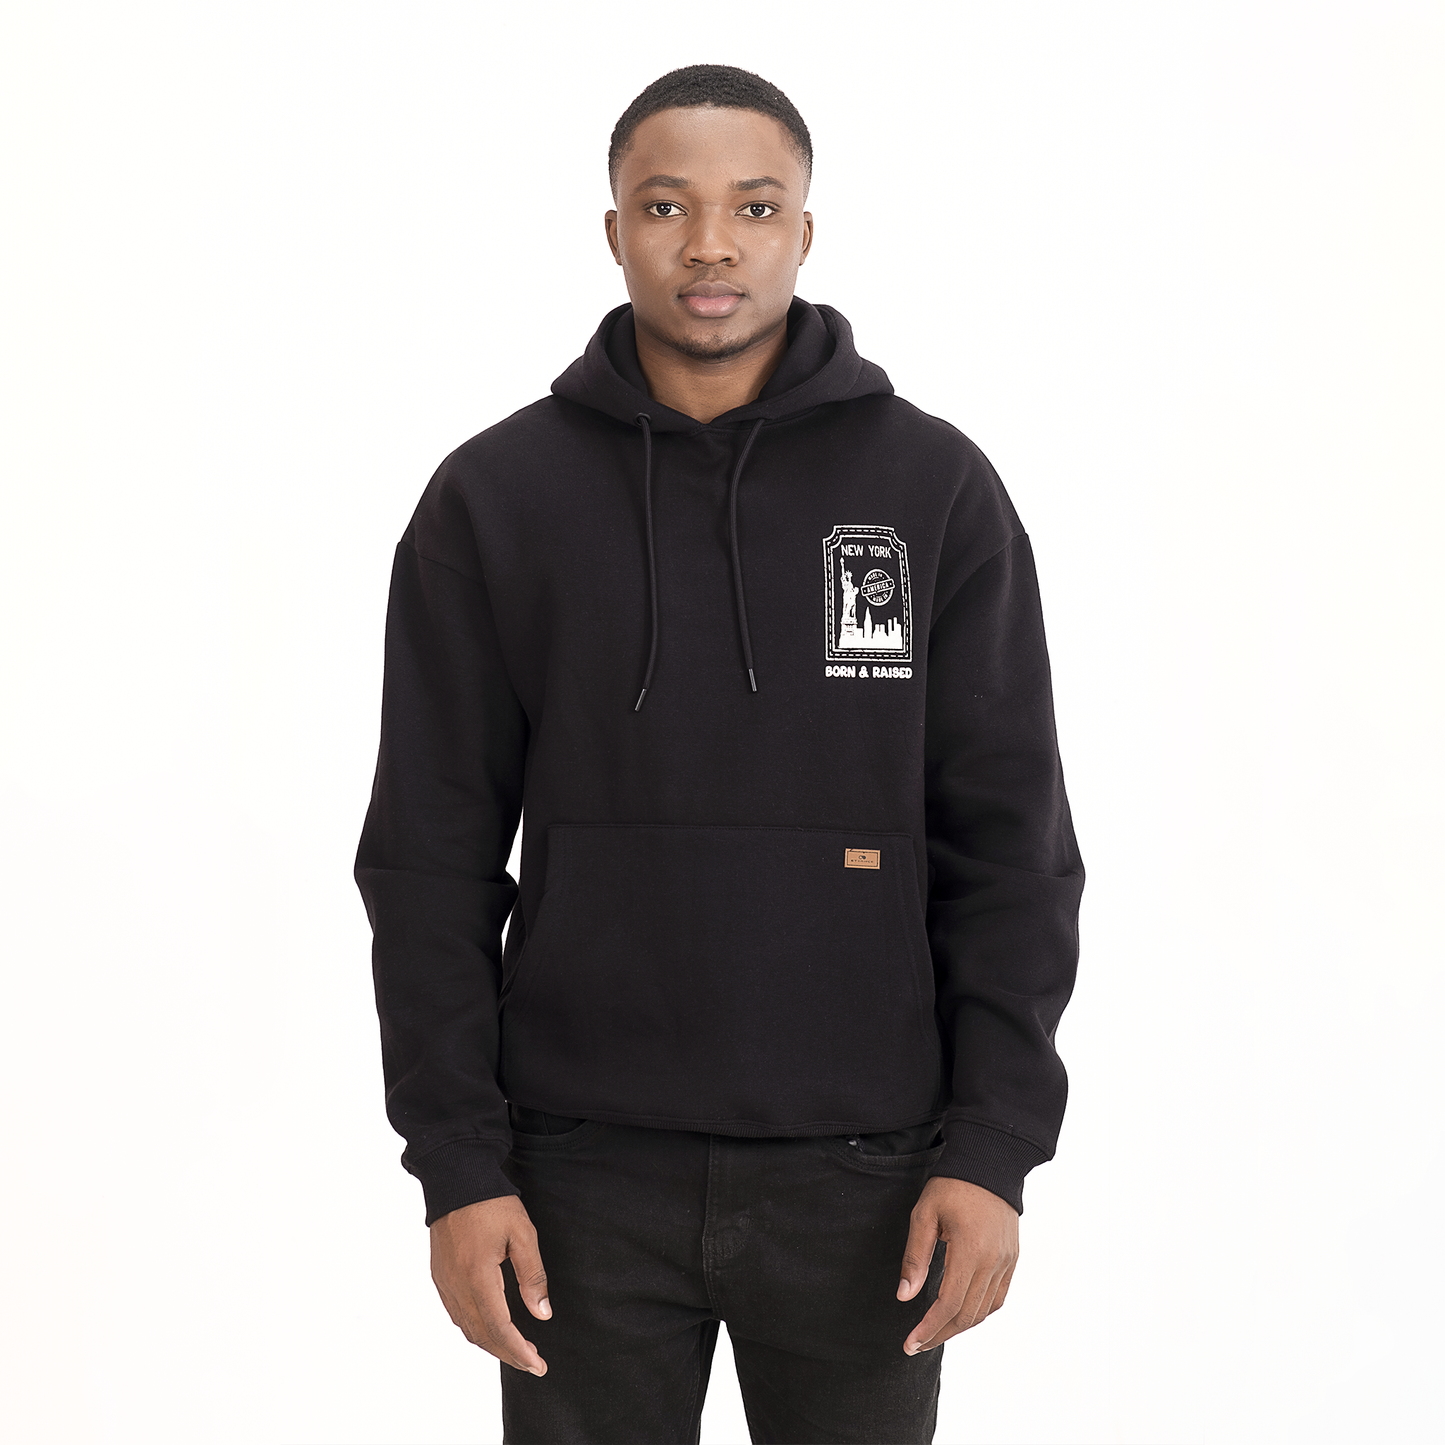 Men's Glow In The Dark Hoodie with New York Stamp